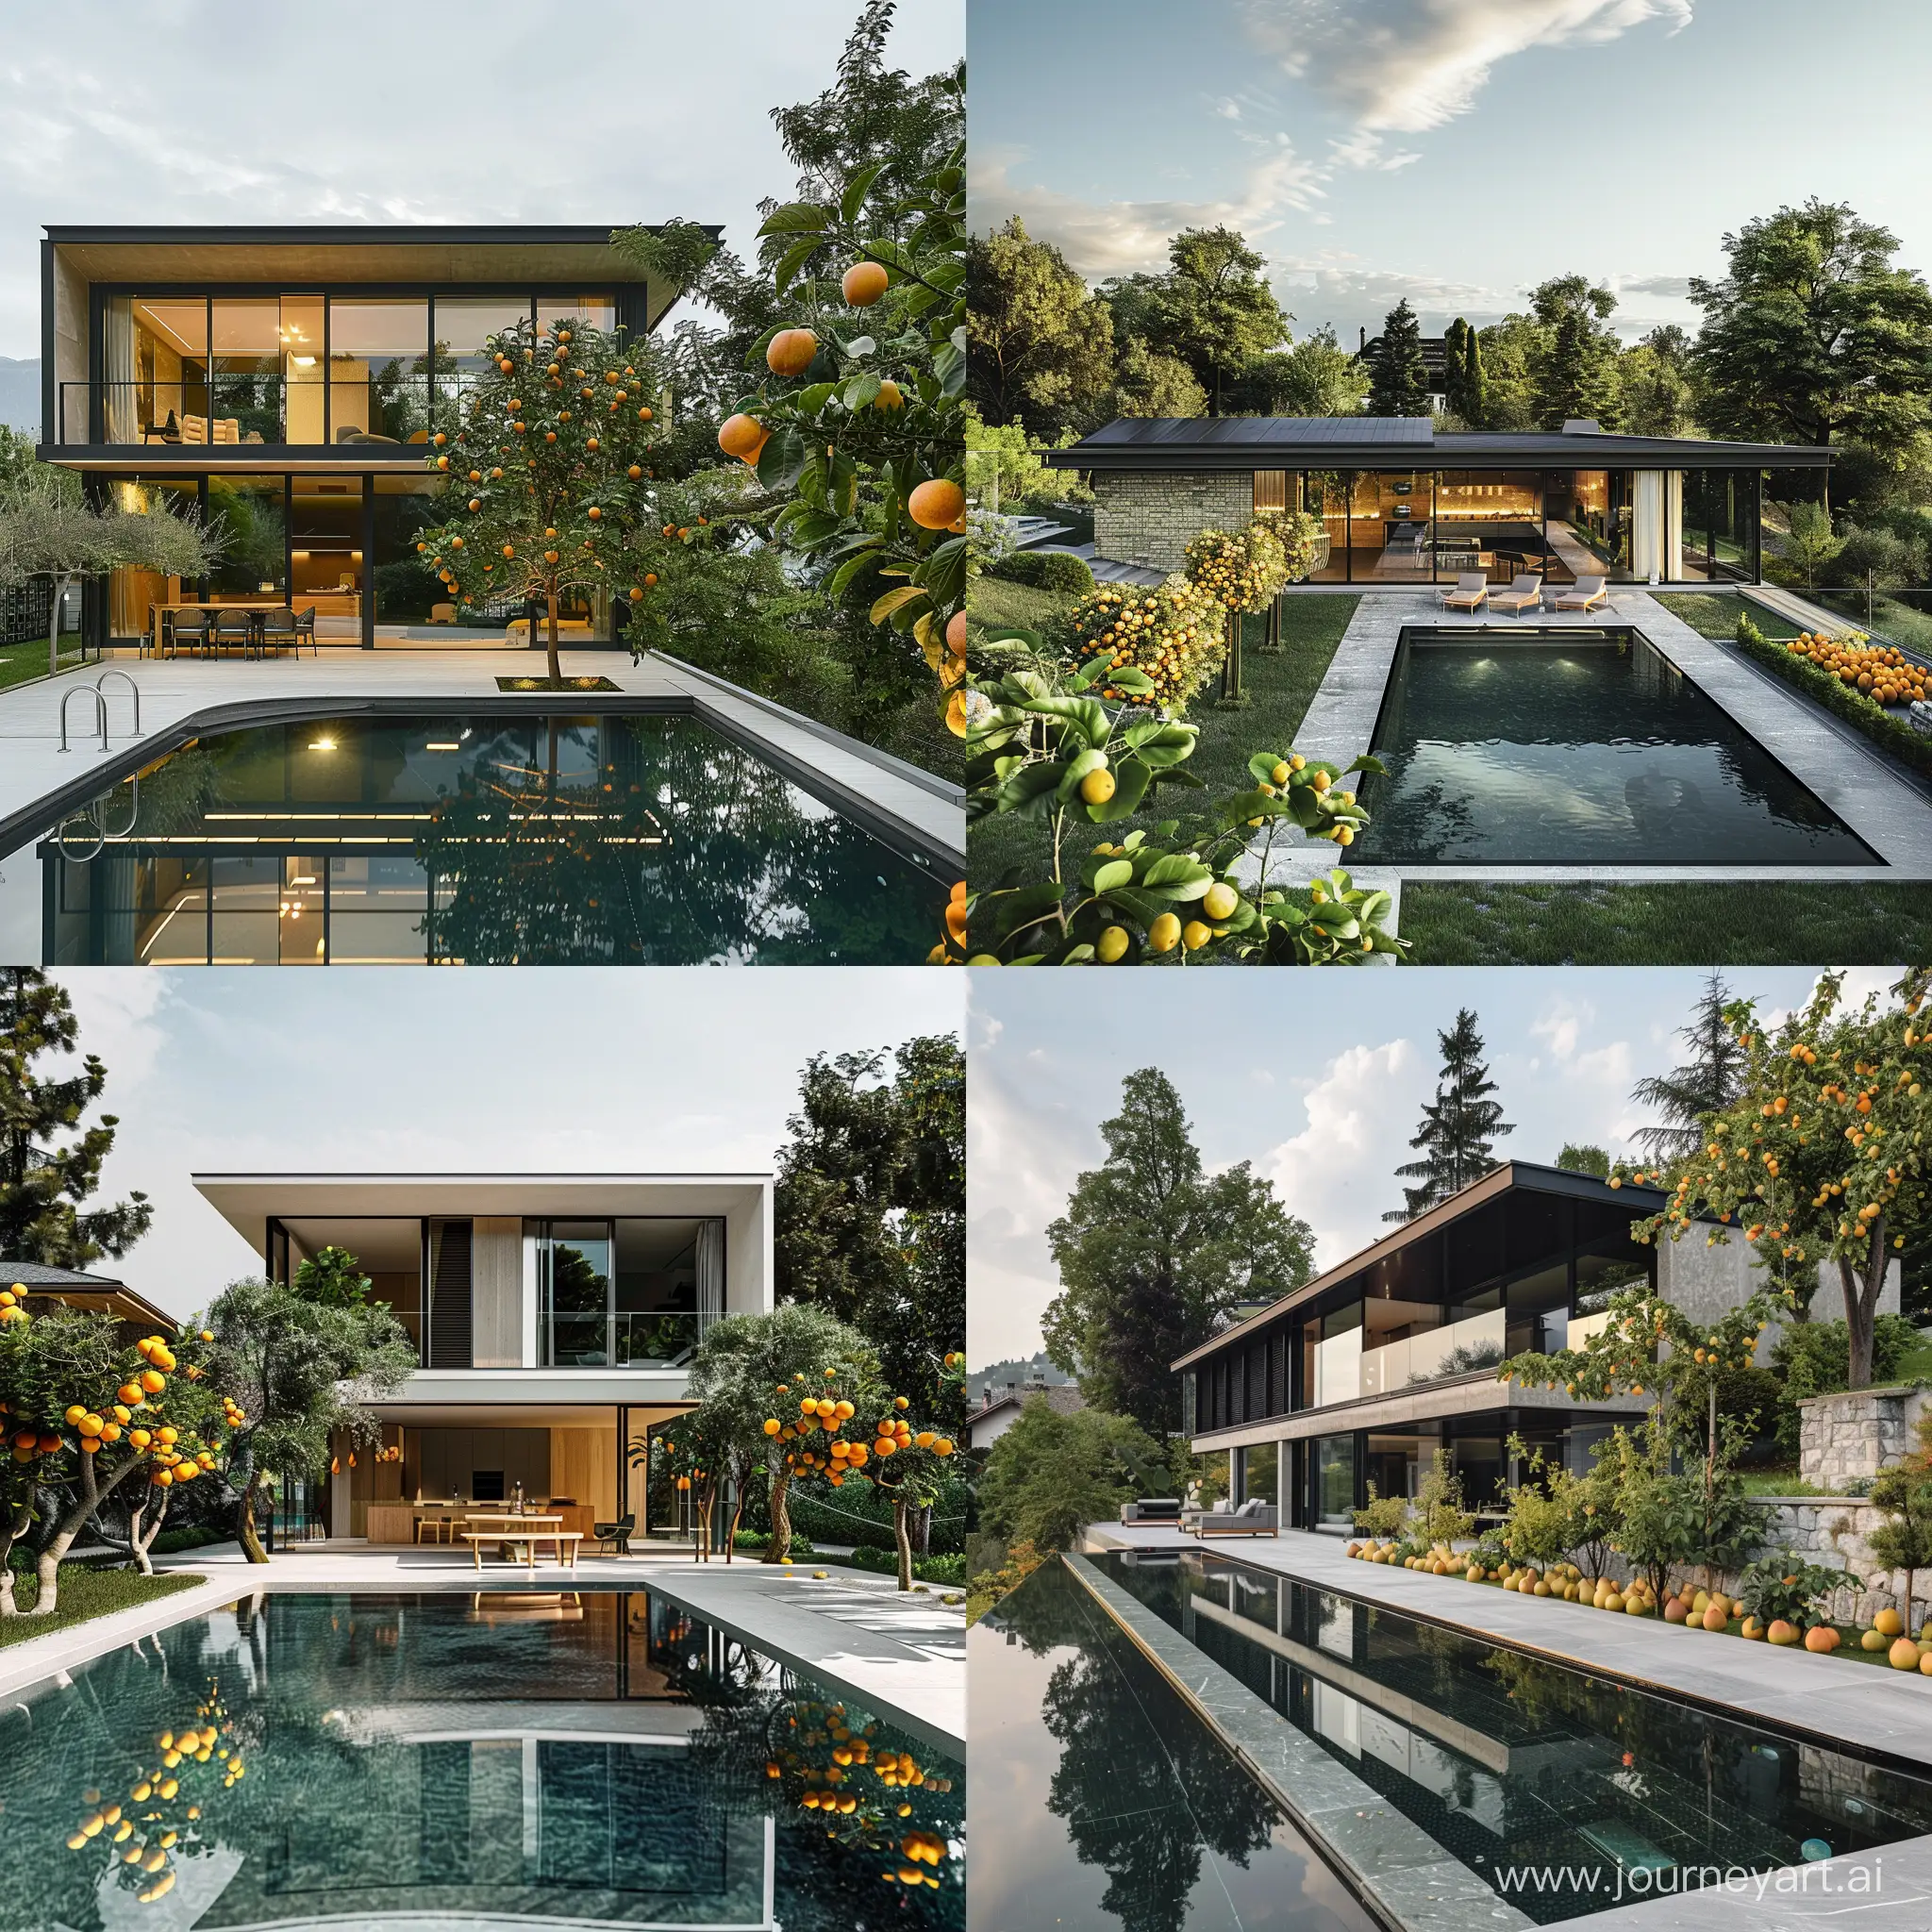 The design of a 40-meter Swiss villa on a 400-meter plot with many fruit trees and a modern pool